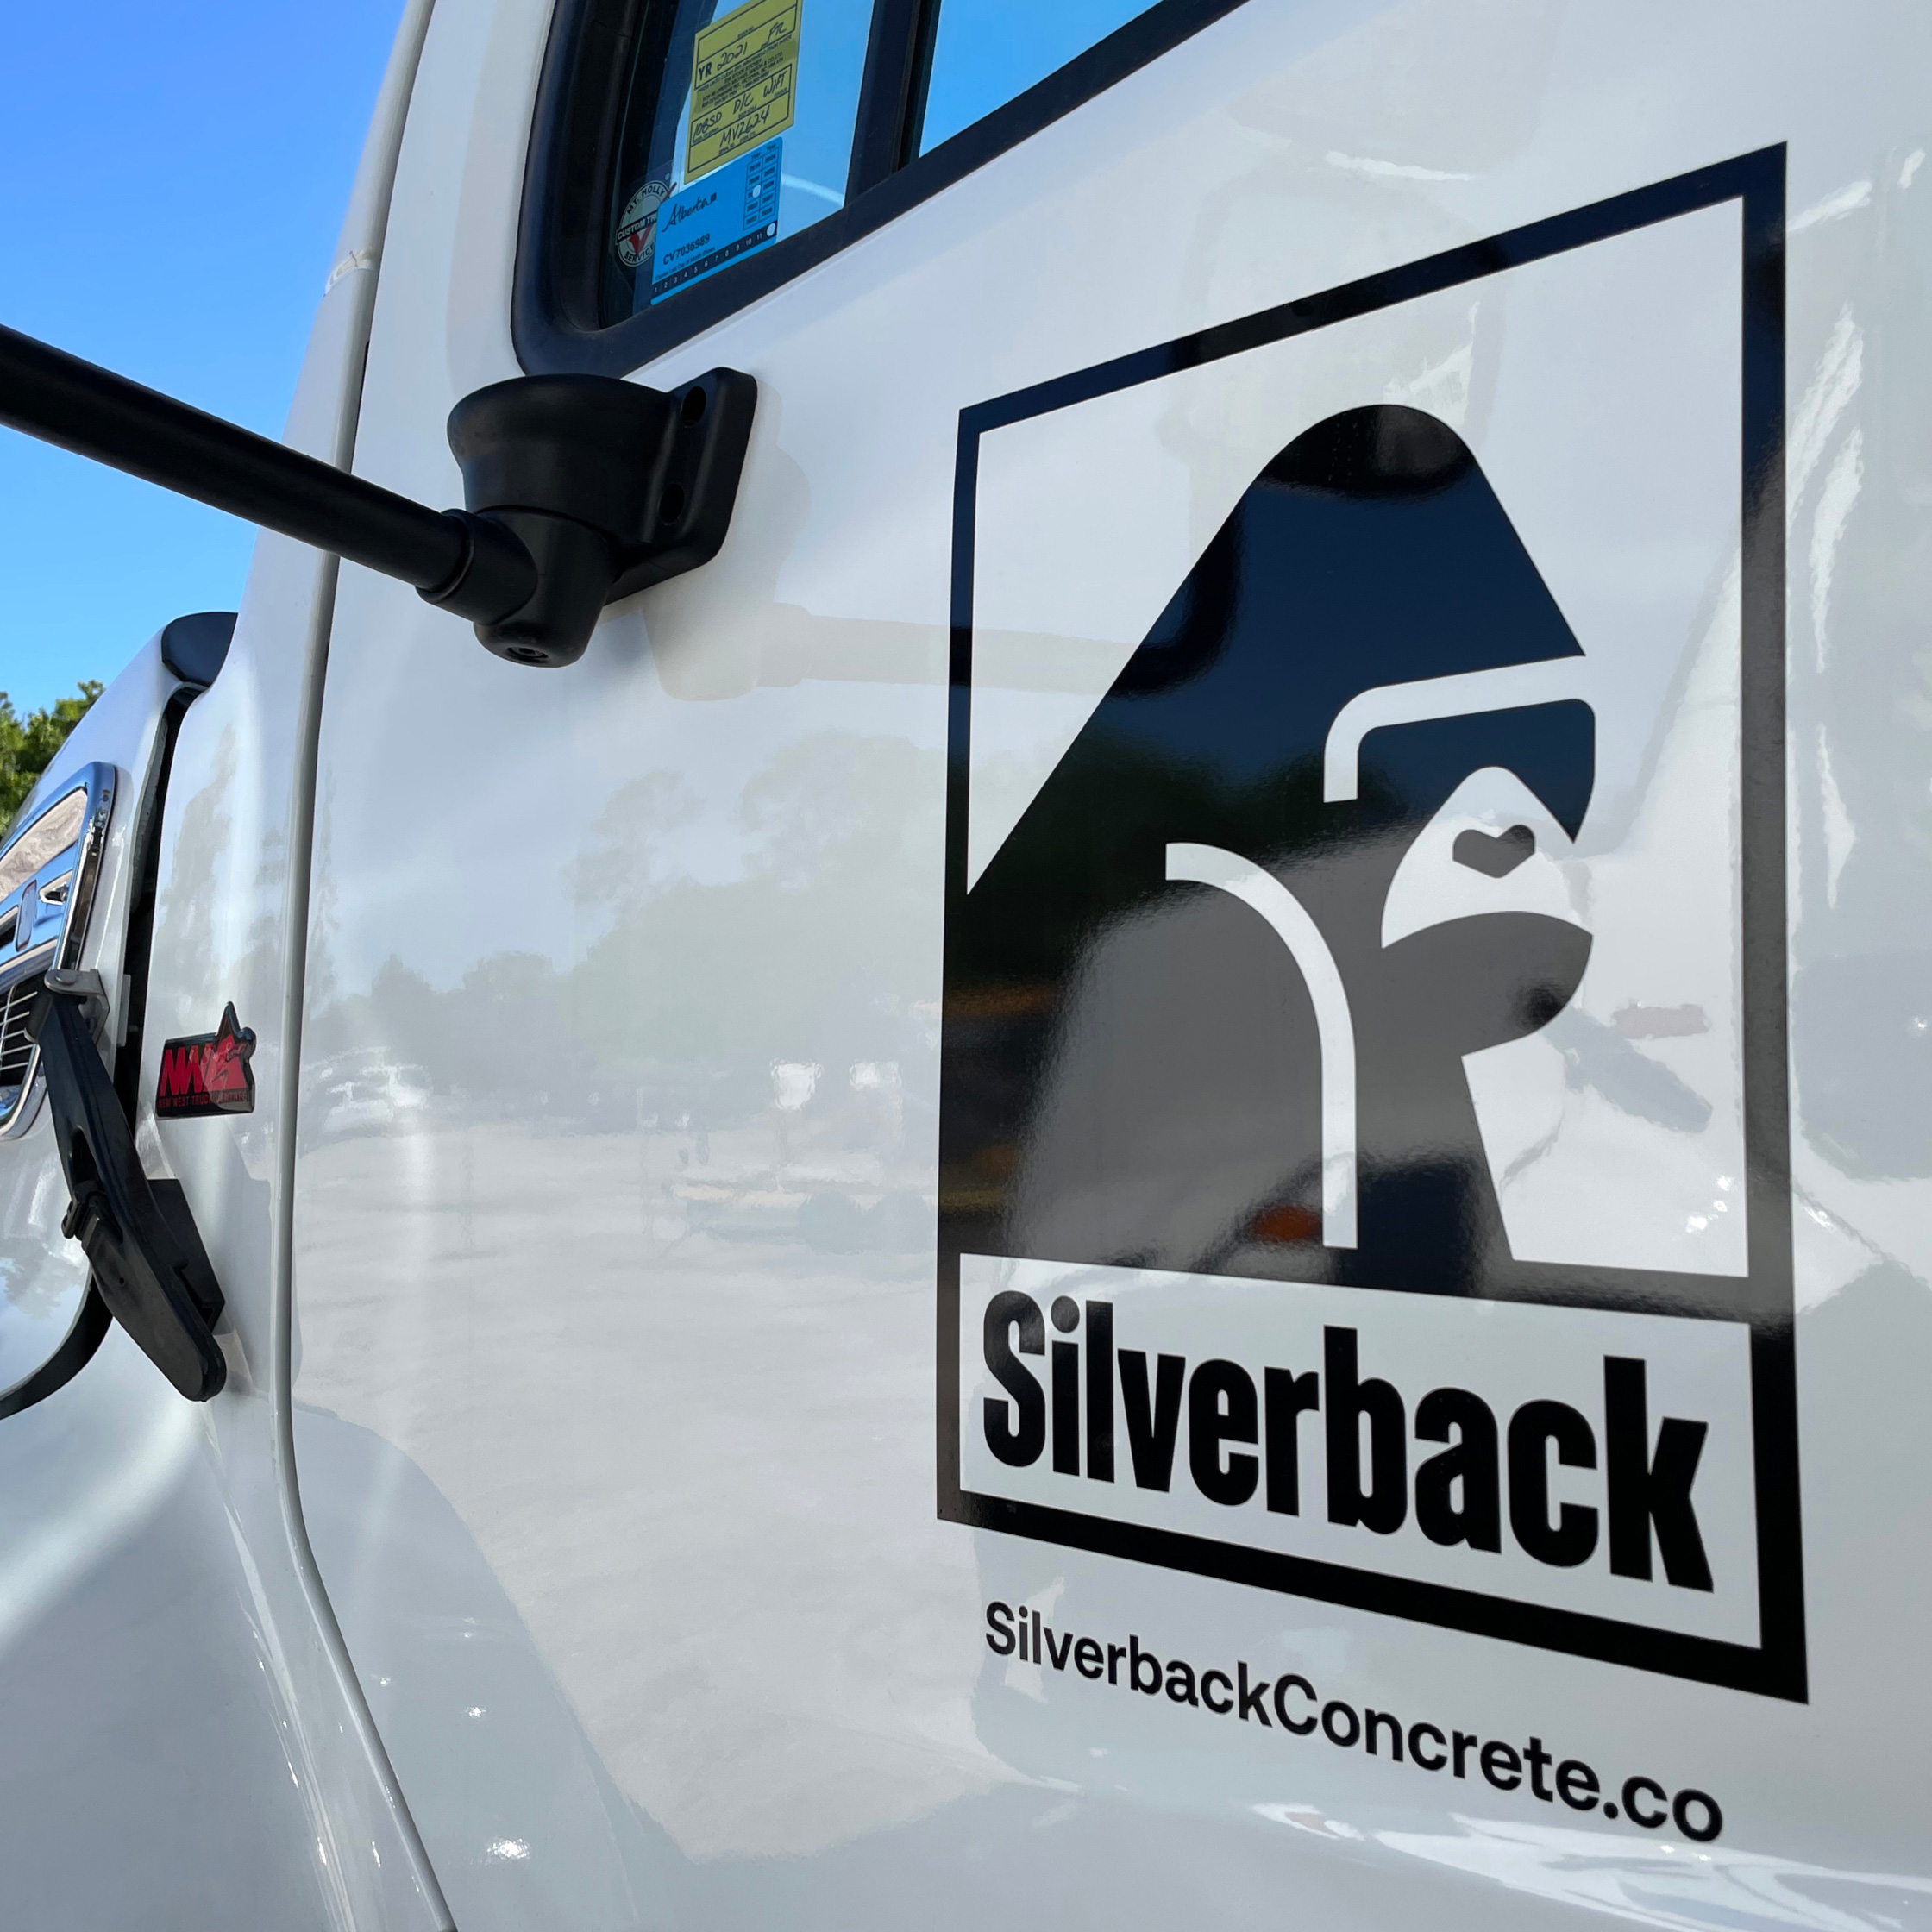 Branded vehicle decals; Silverback Concrete.